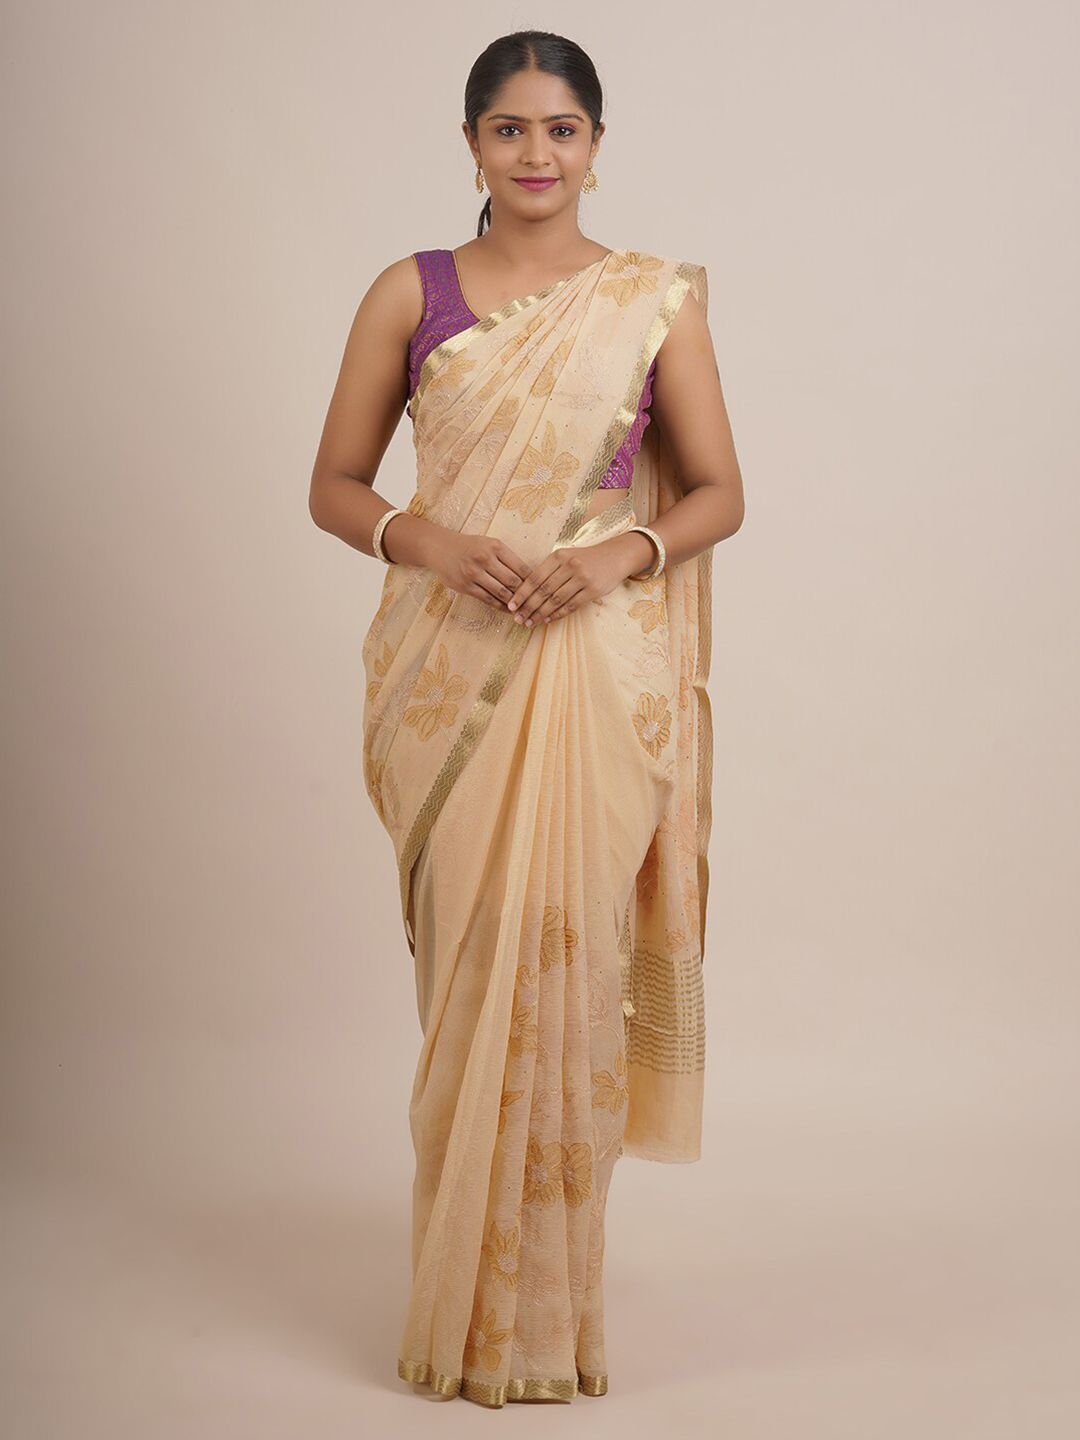 Pothys Peach-Coloured & Gold-Toned Floral Pure Chiffon Saree Price in India